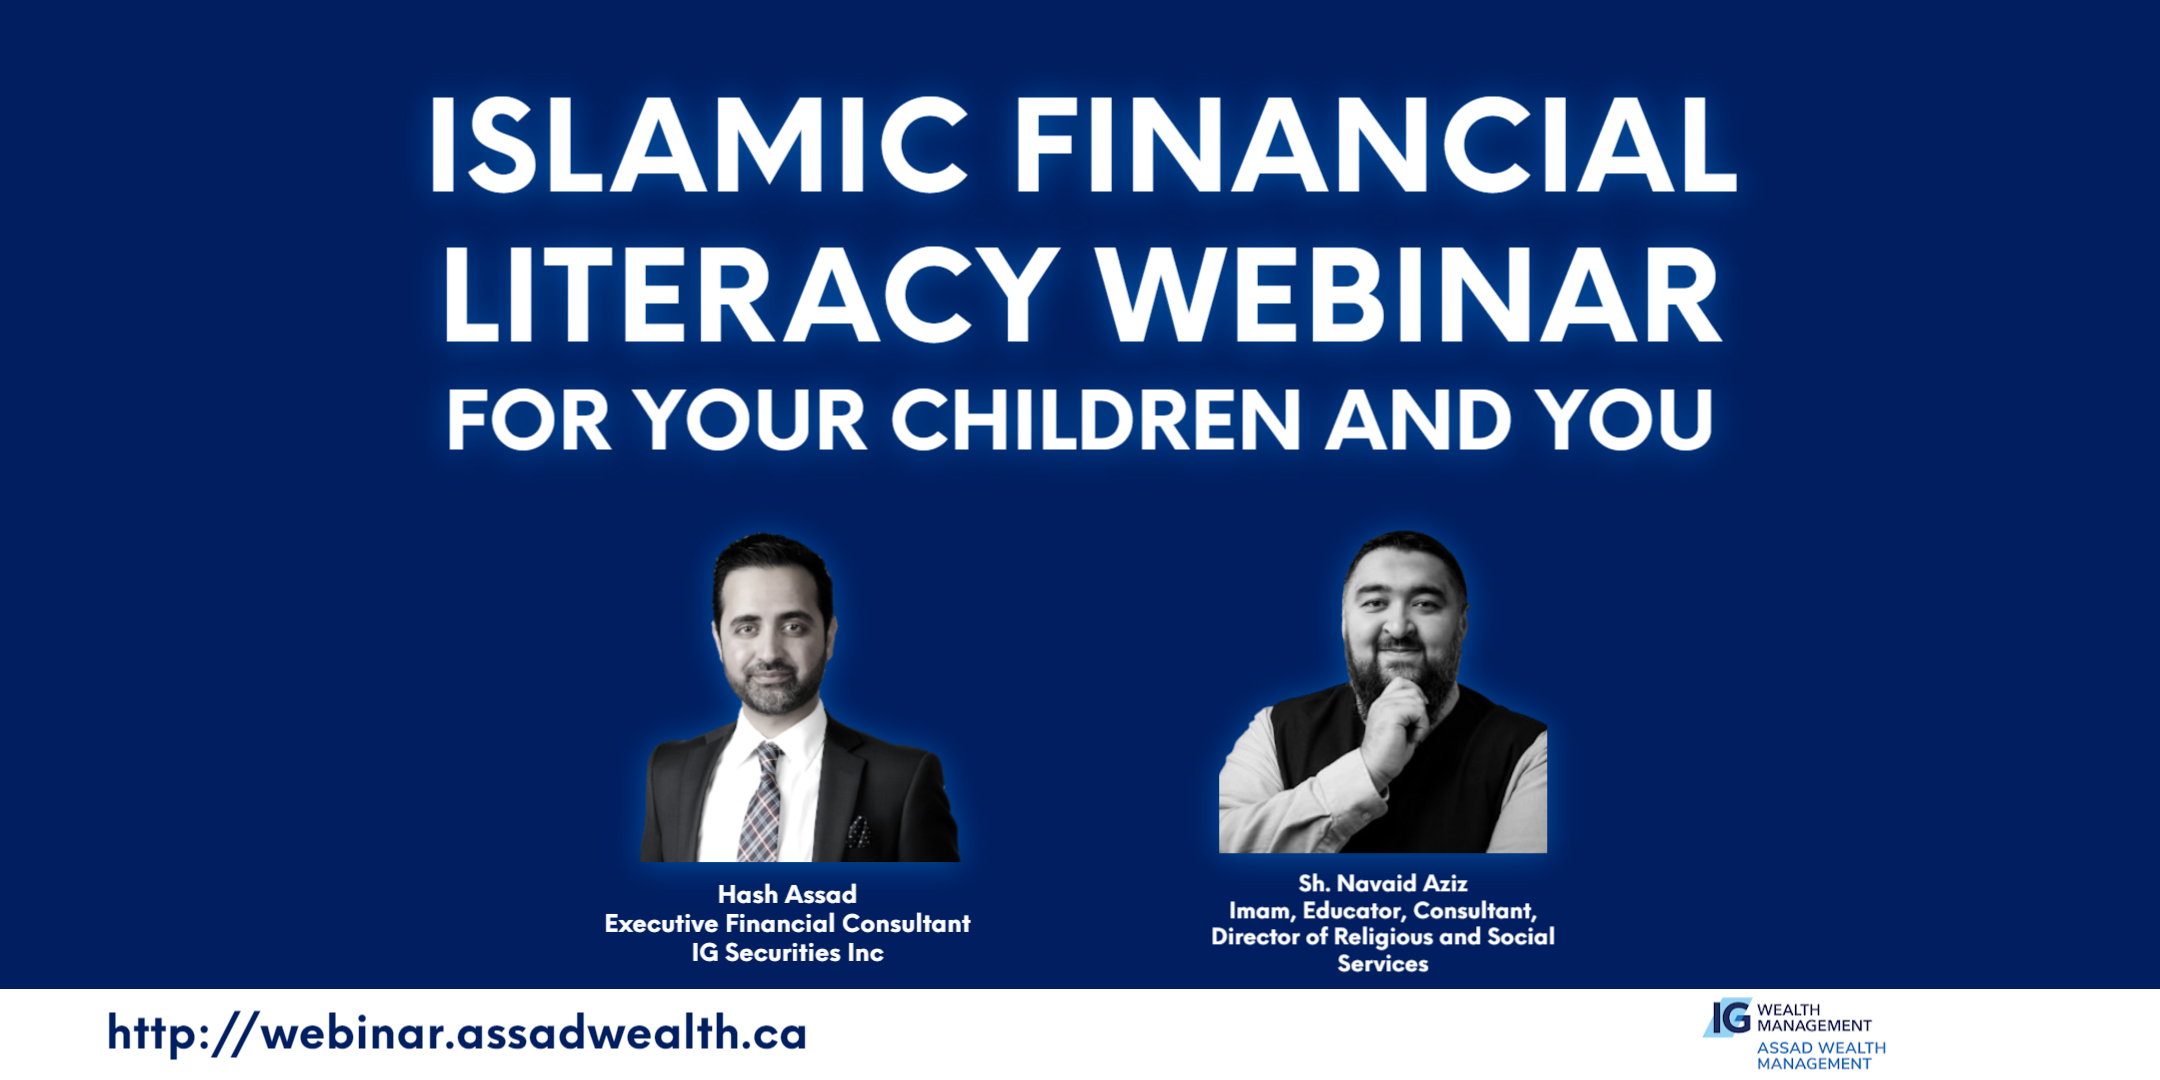 Islamic Financial Literacy Webinar for your Children and You